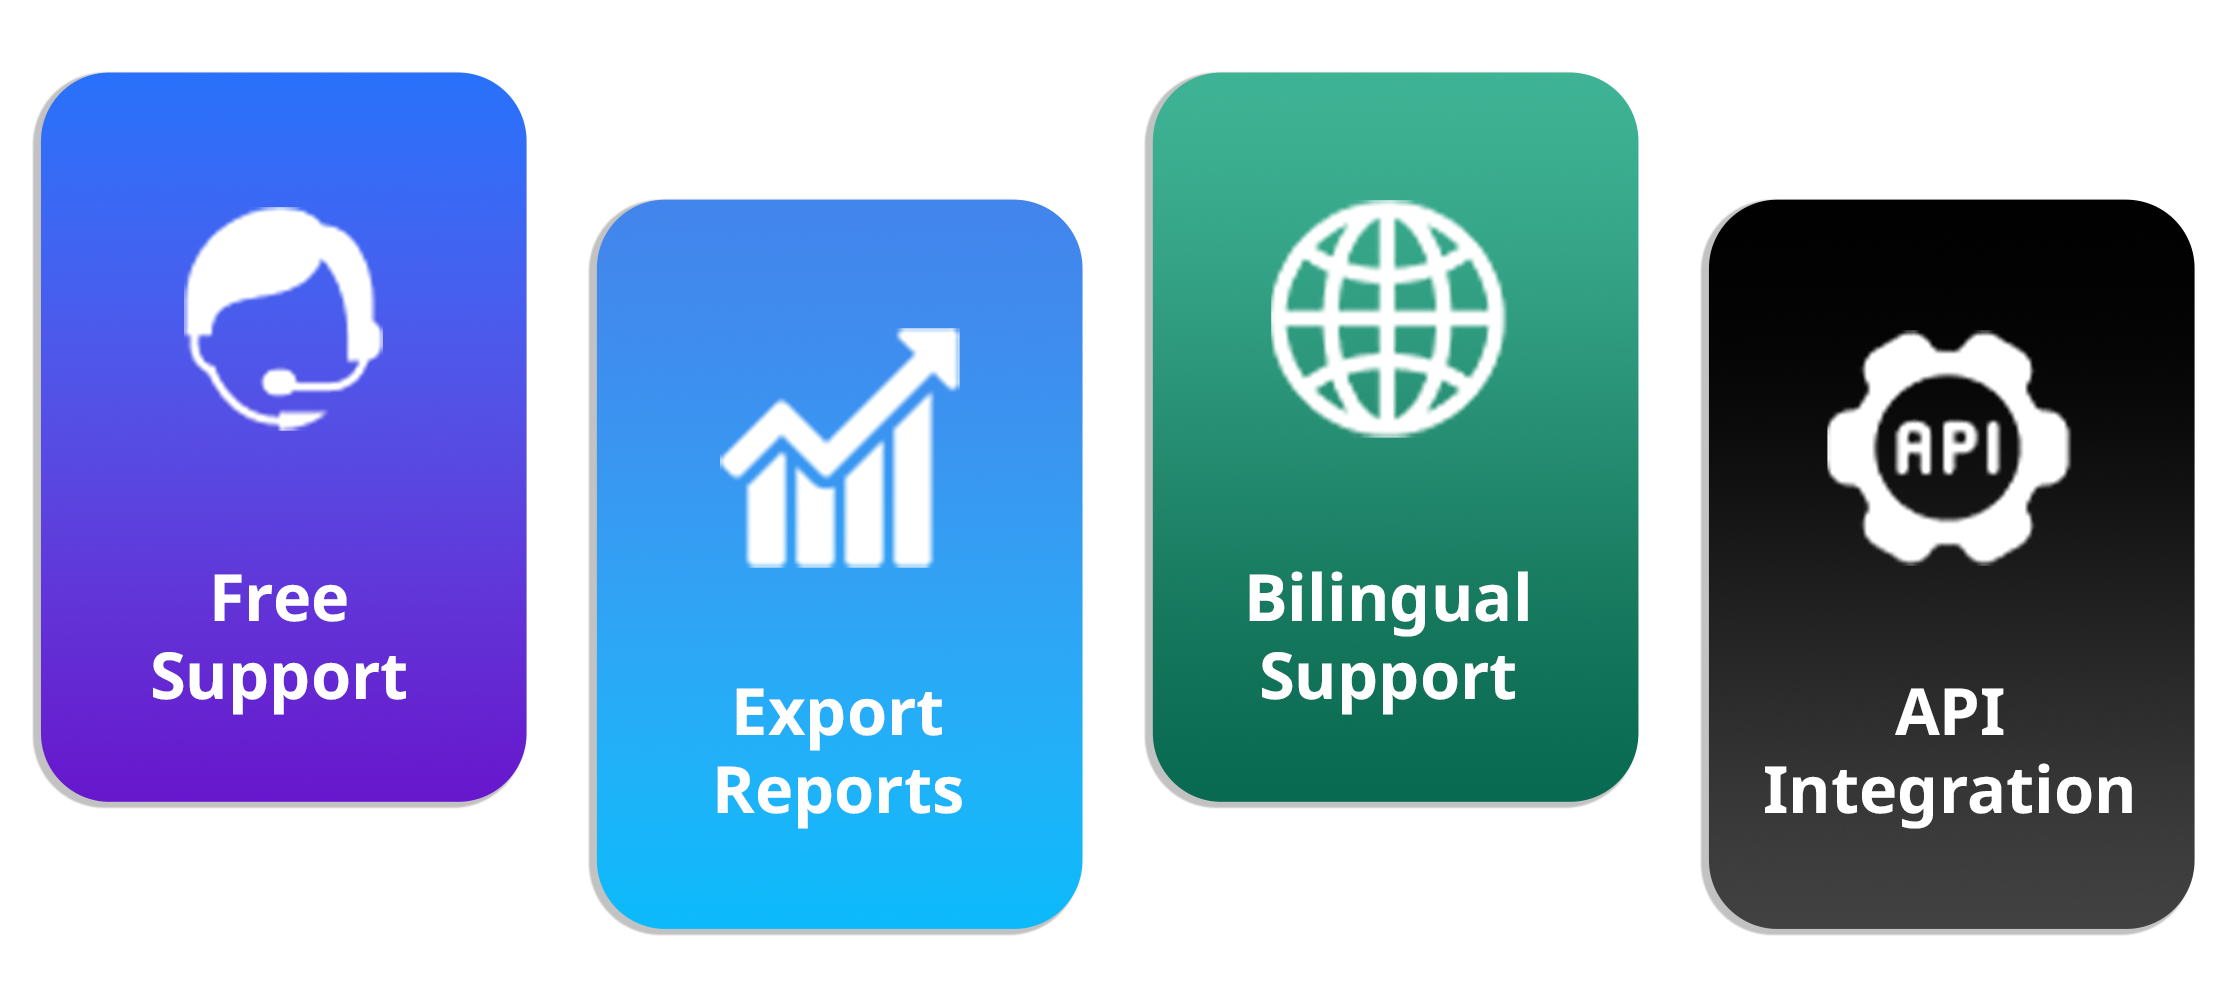 Free support, export reports, bilingual support ans API integration